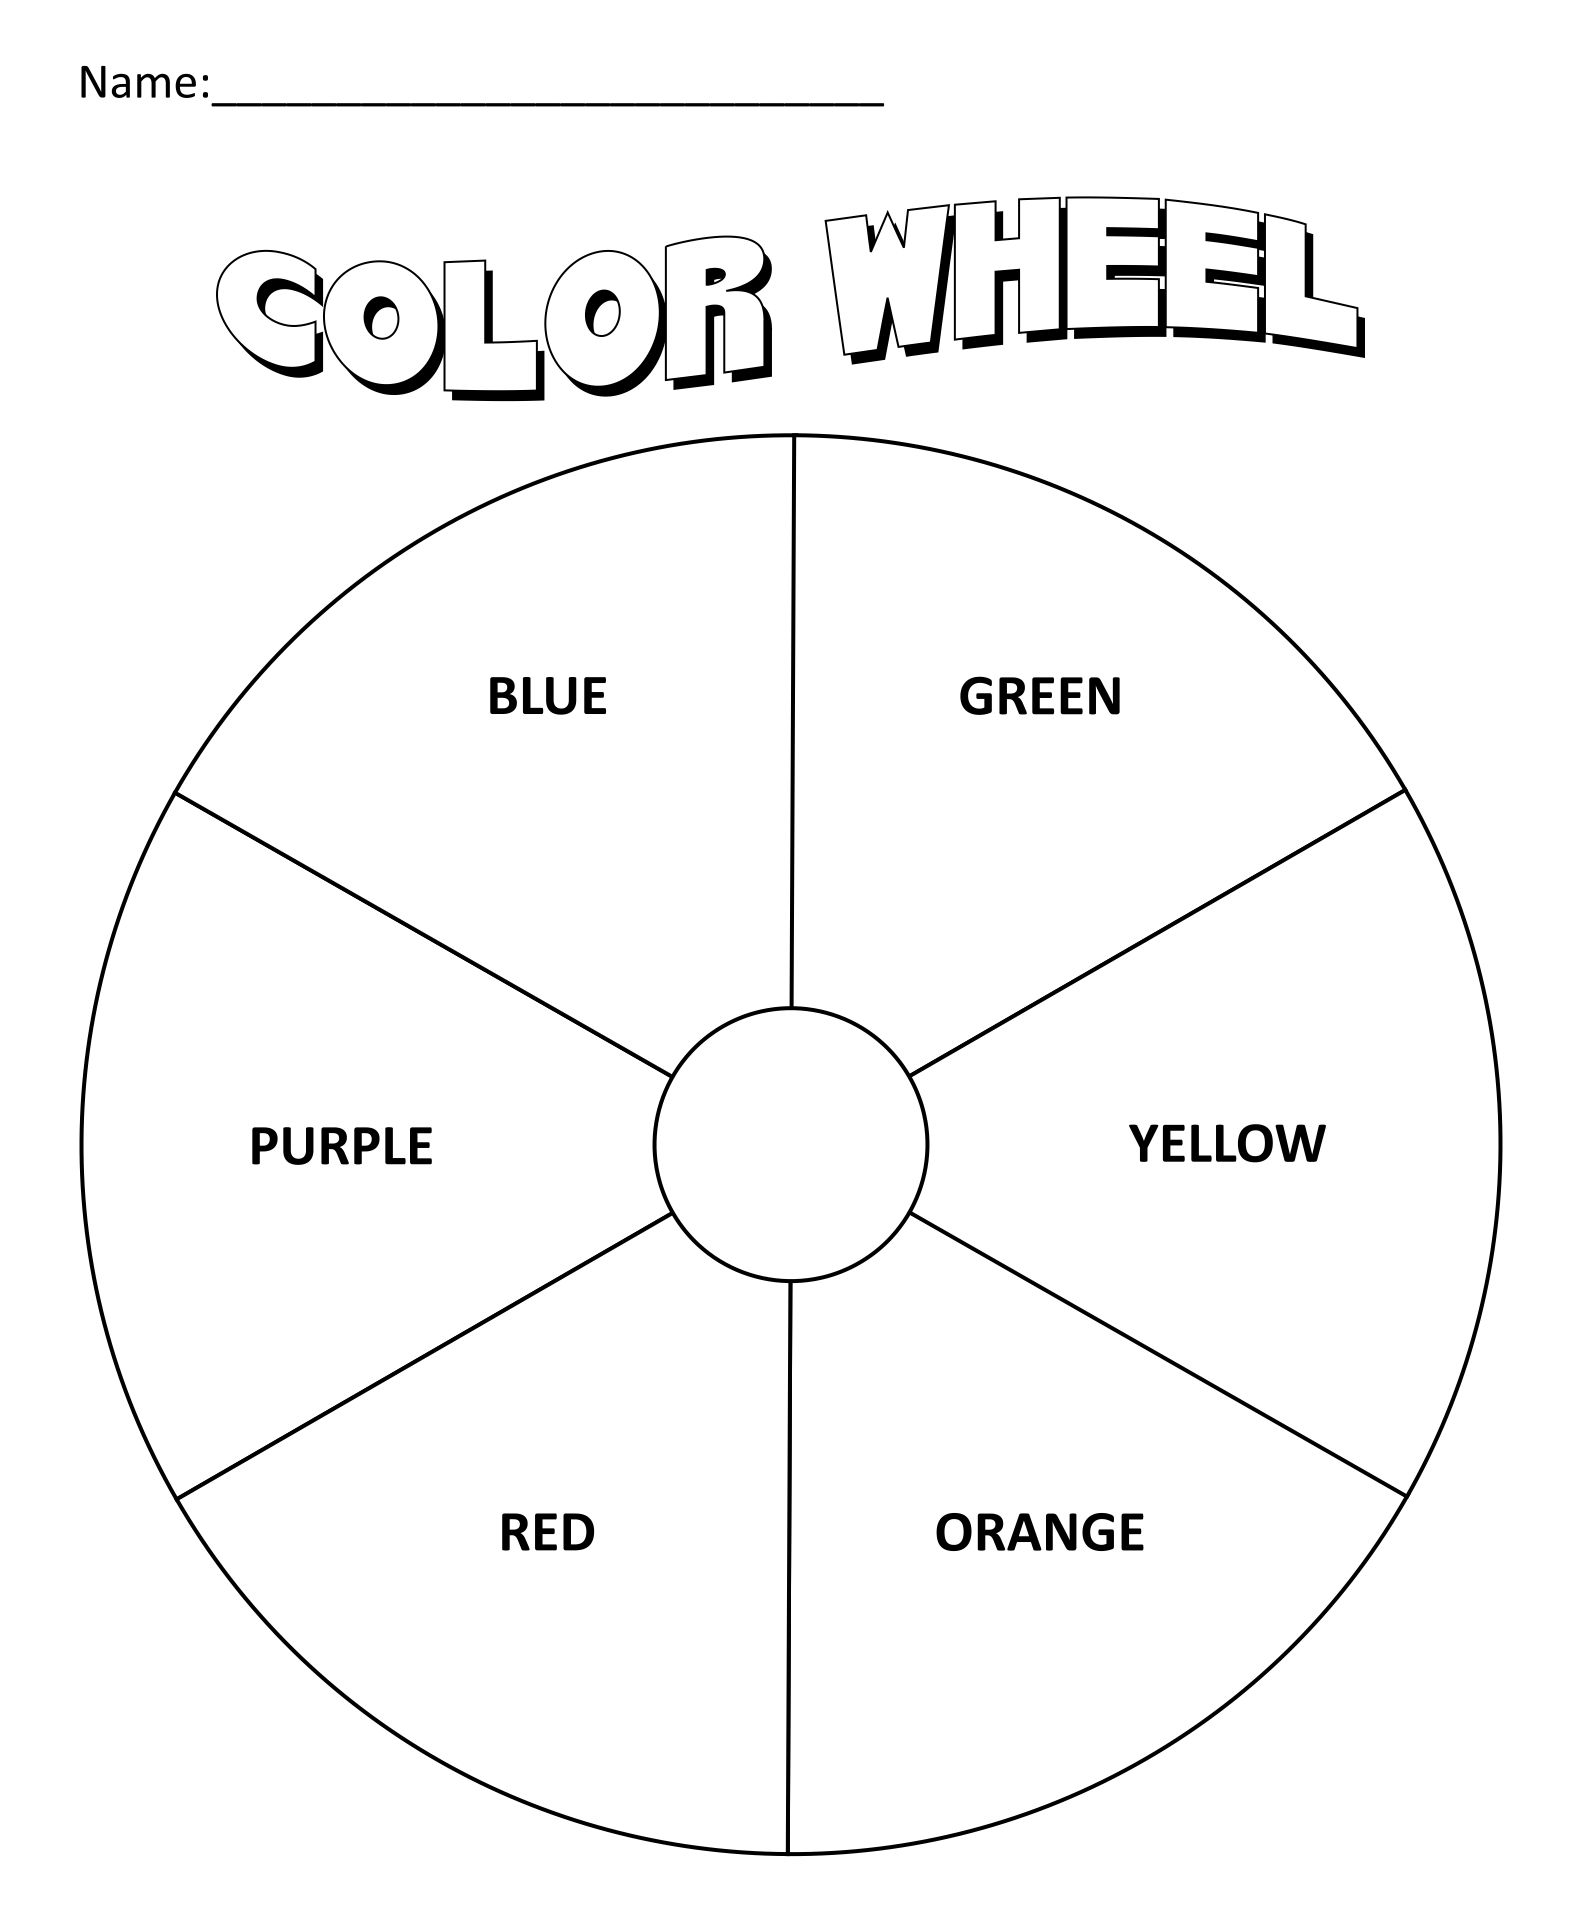 10-best-color-wheel-printable-for-students-pdf-for-free-at-printablee